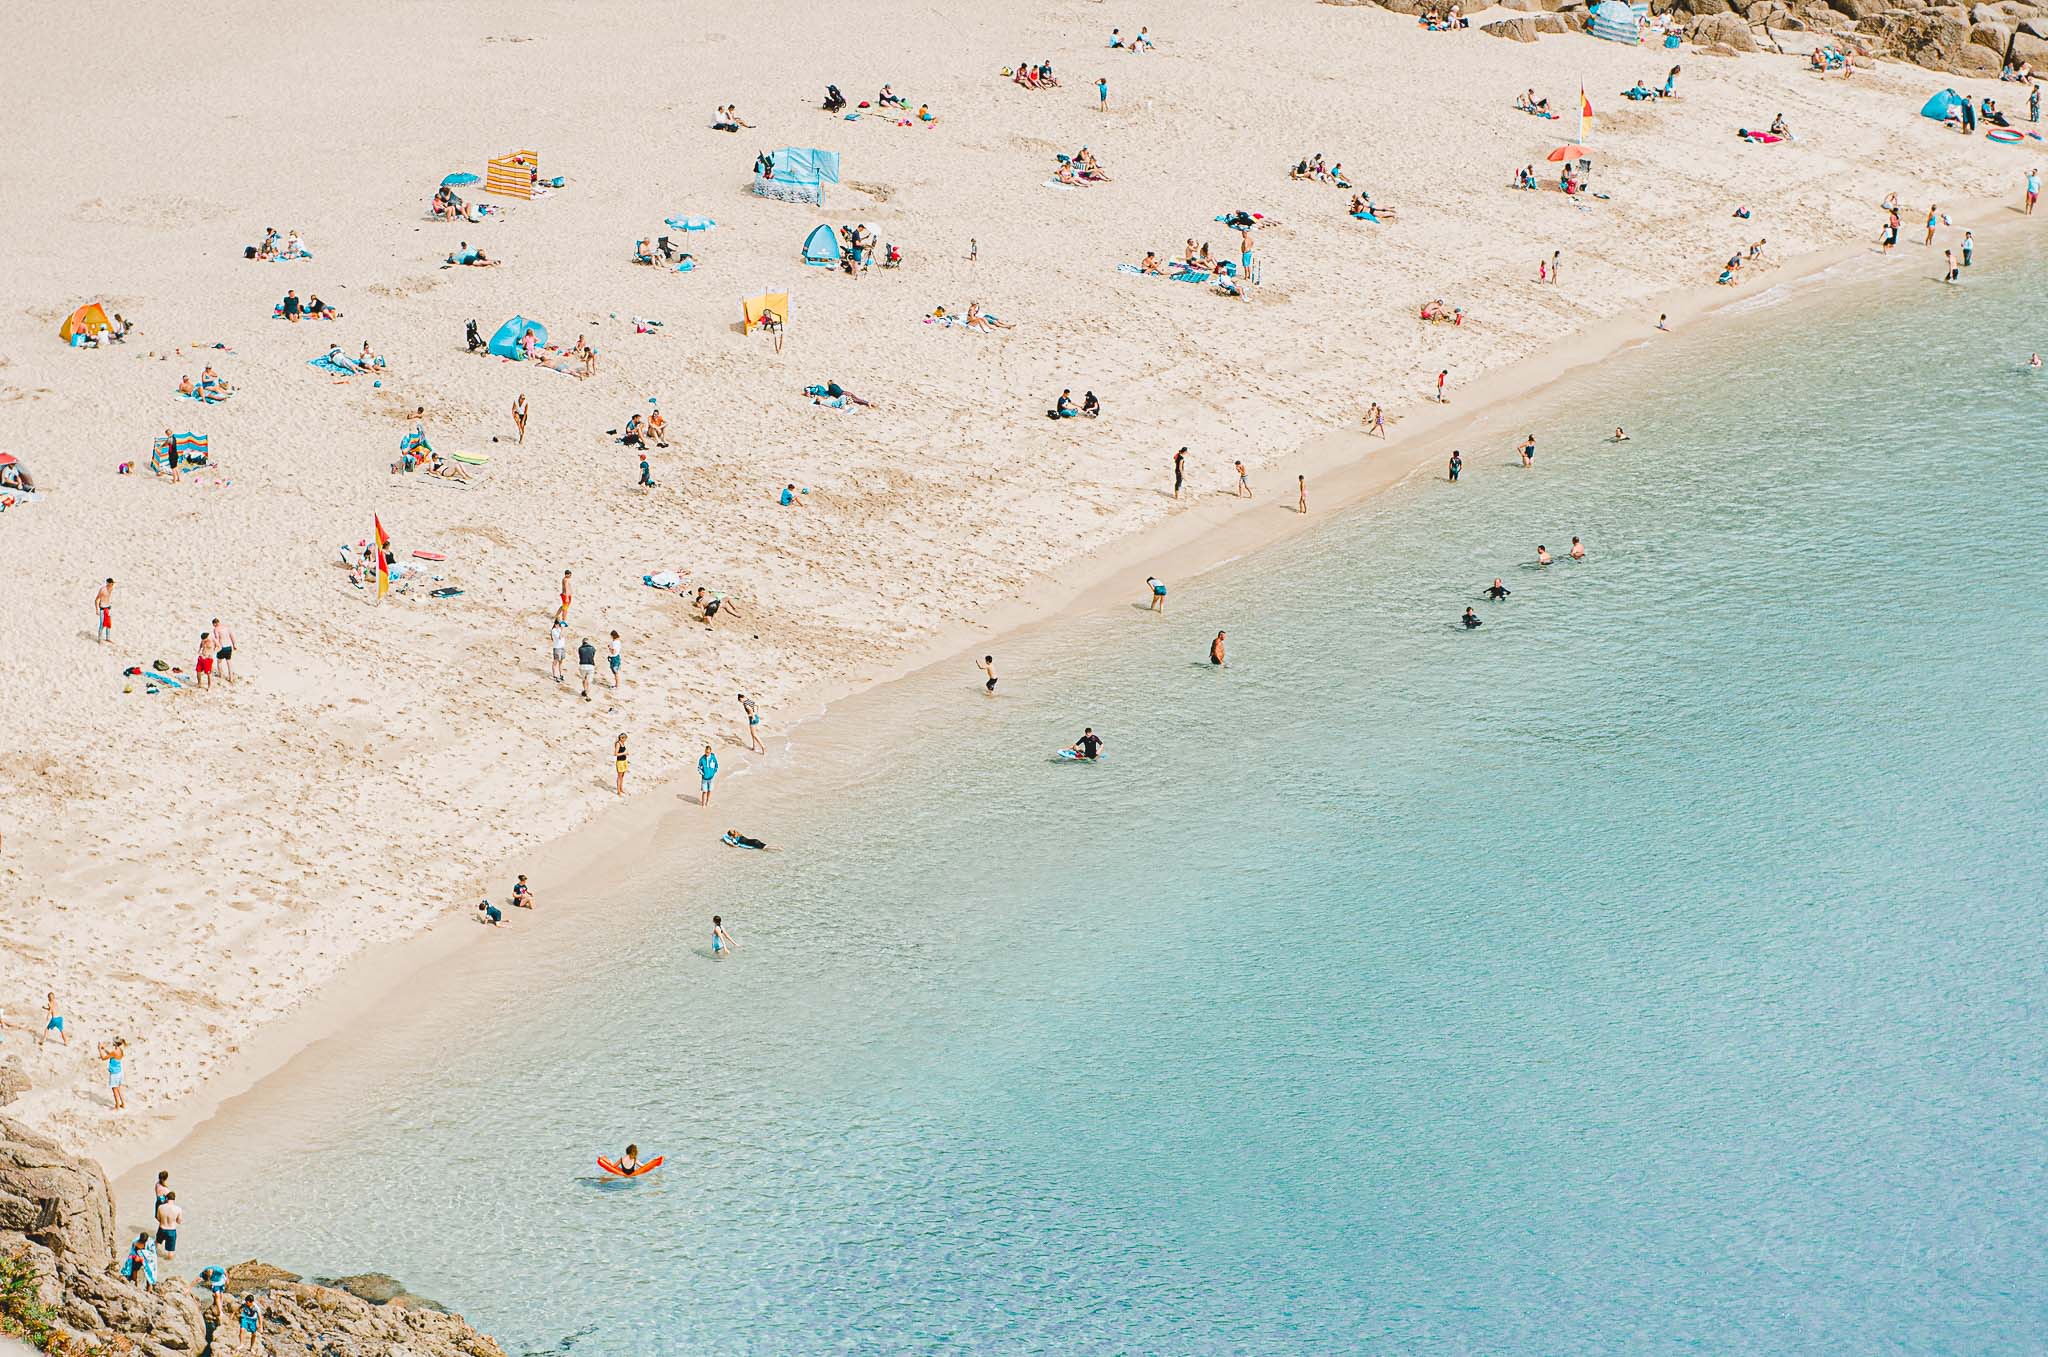 An above view of this small hidden beach with people enjoying the beach and blue sea